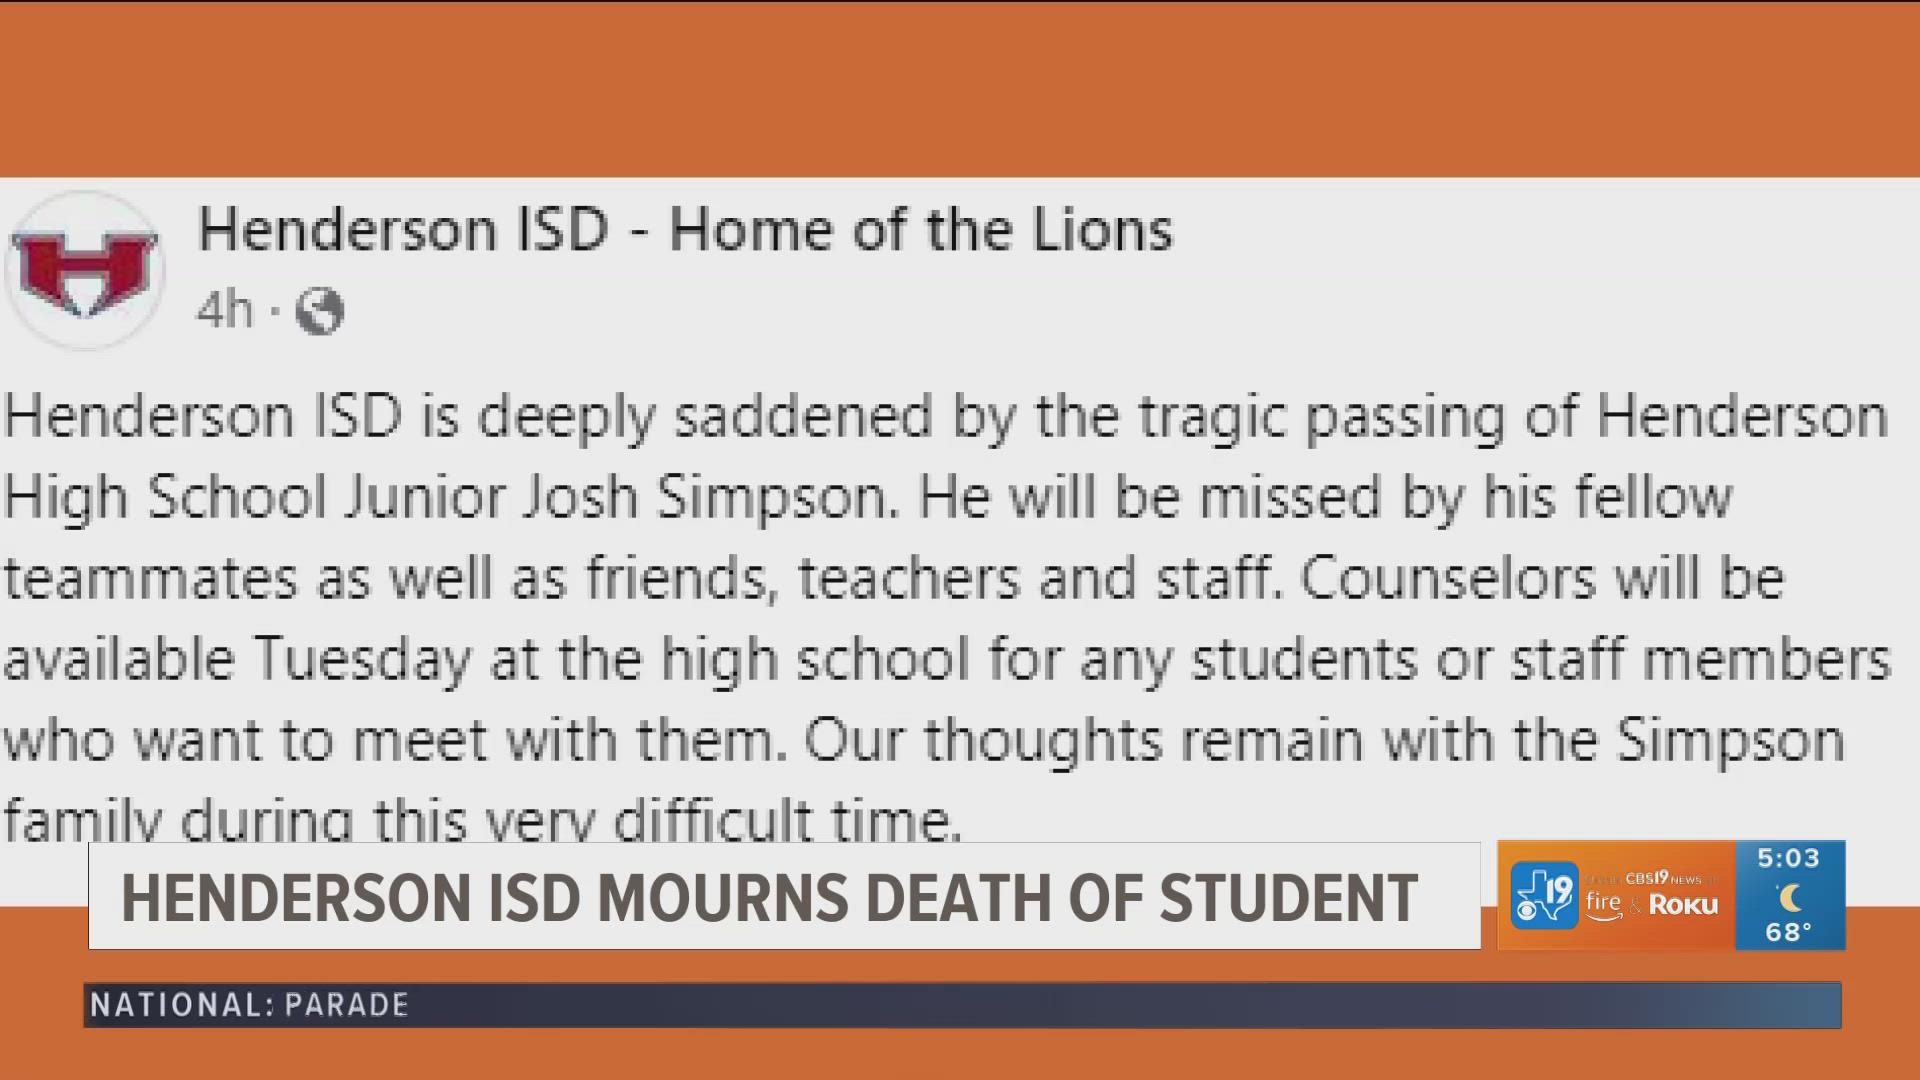 "He will be missed by his fellow teammates as well as friends, teachers and staff," HISD said.